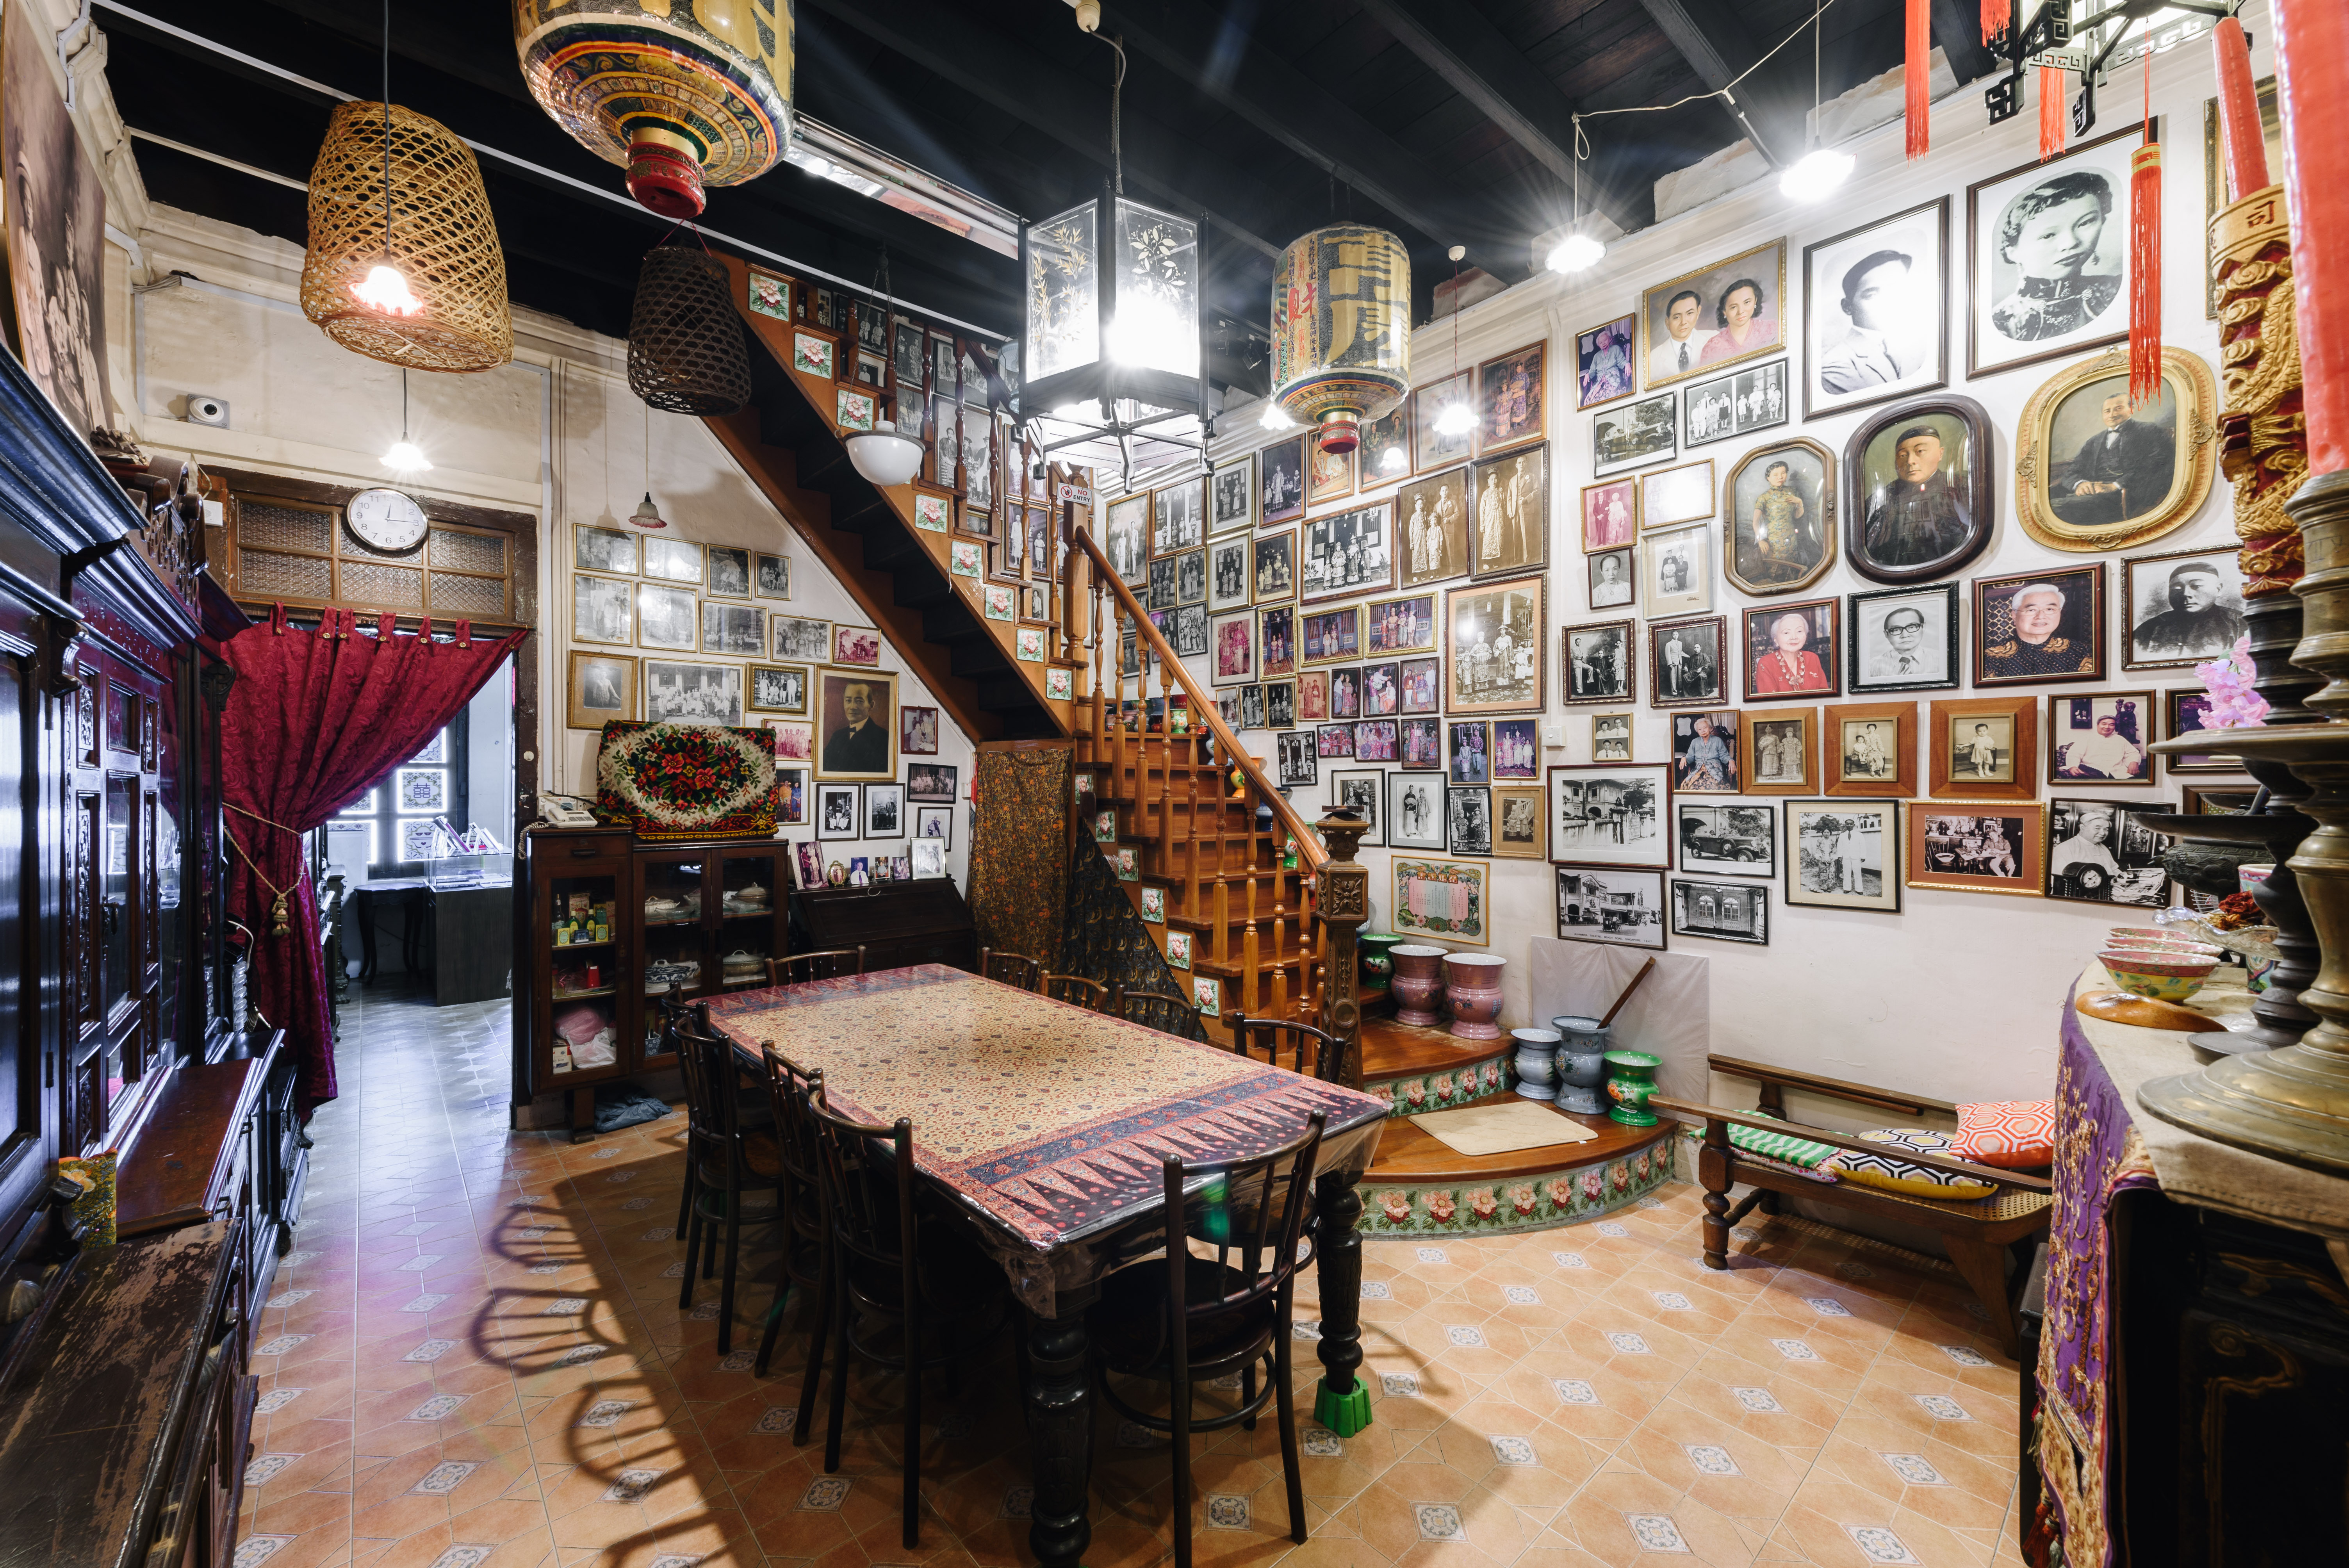  Wide shot of the interior of the Katong Antique House